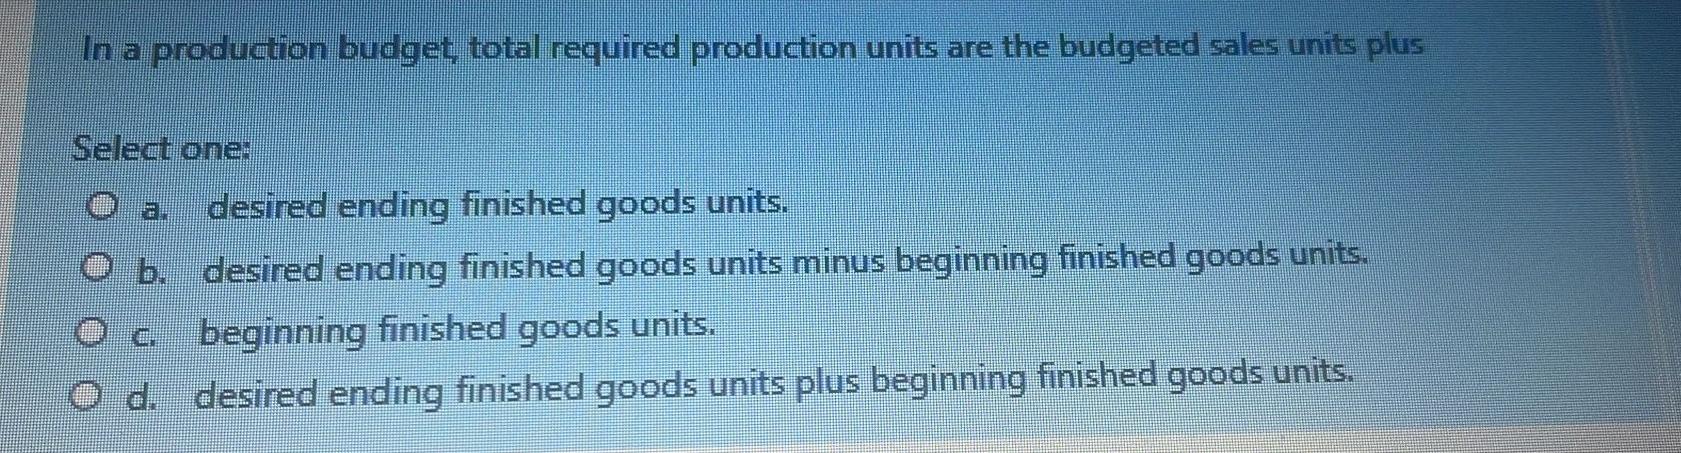 In a production budget total required production units are the budgeted sales units plusSelect one:desired ending finished